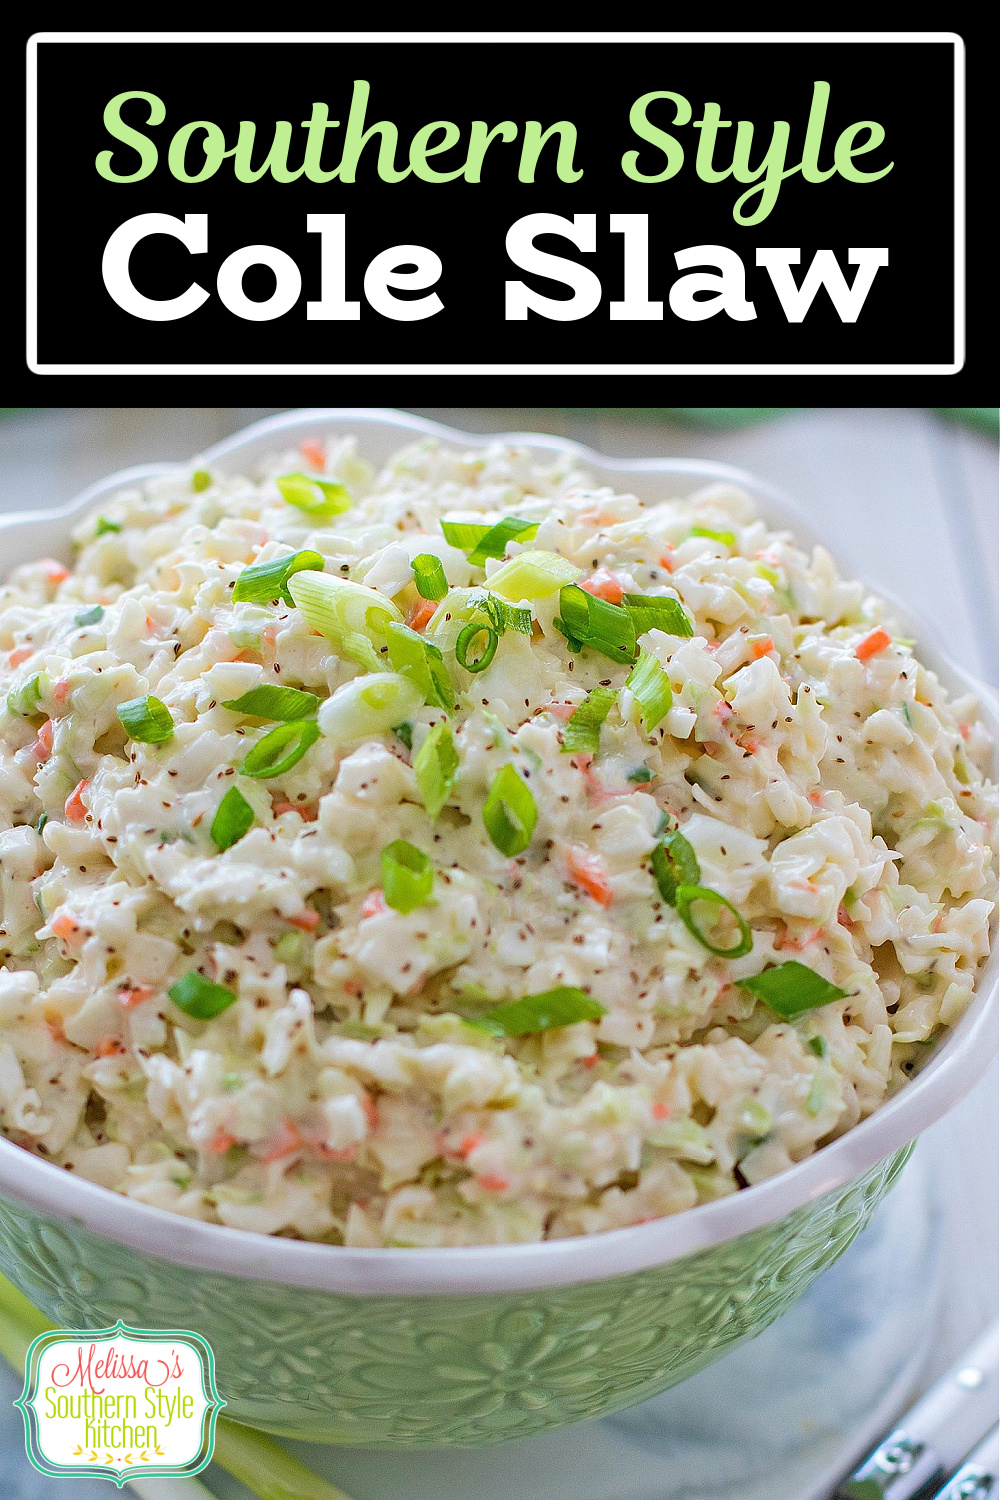 Enjoy this slaw atop hot dogs, with beef or pork barbecue, fried chicken or as a side dish with pinto beans and corn bread #southerncoleslaw #southernstylecoleslaw #coleslaw #coleslawrecipe #sidedishrecipes #salads #cabbagerecipes #easyrecipes #southernrecipes #southernfood